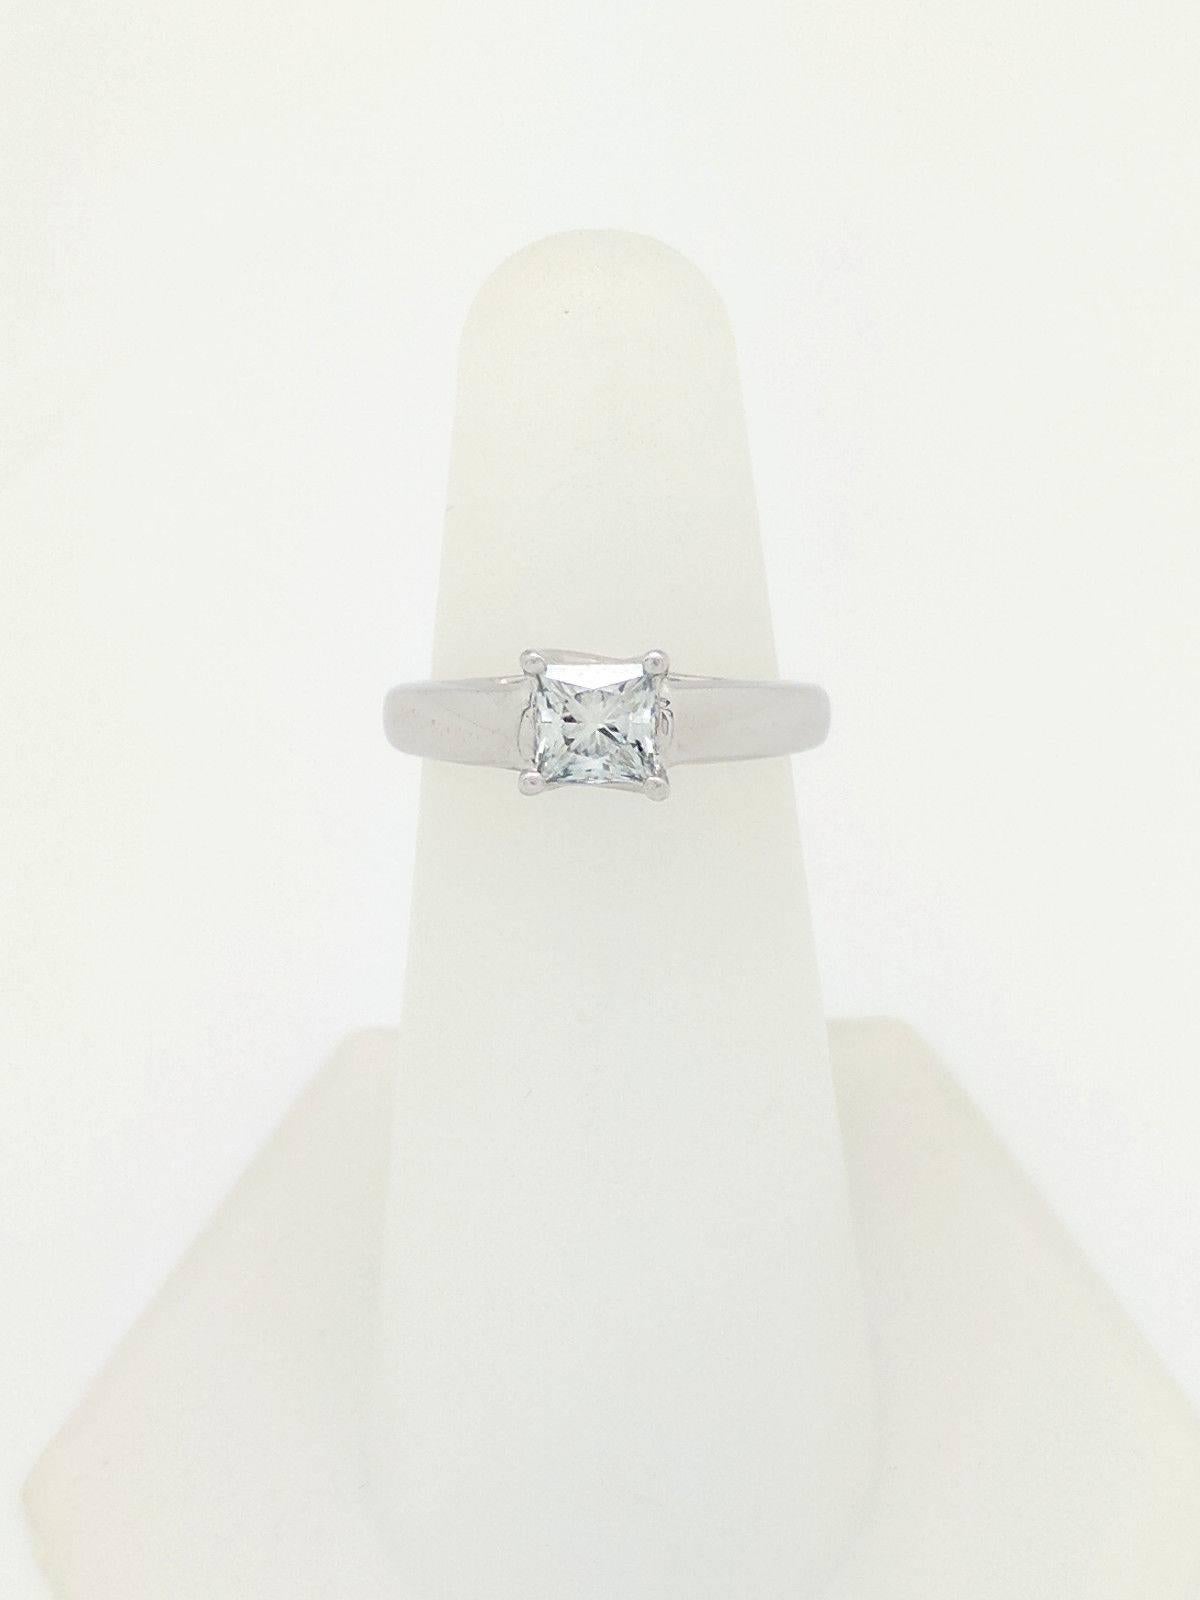 Tolkowsky 14K & Platinum .70ct Princess Cut Diamond Engagement Ring IGI CERT

You are viewing a beautiful Tolkowsky Diamond Engagement Ring. This diamond is certified by IGI (International Gemological Information) and has been graded as SI1 in